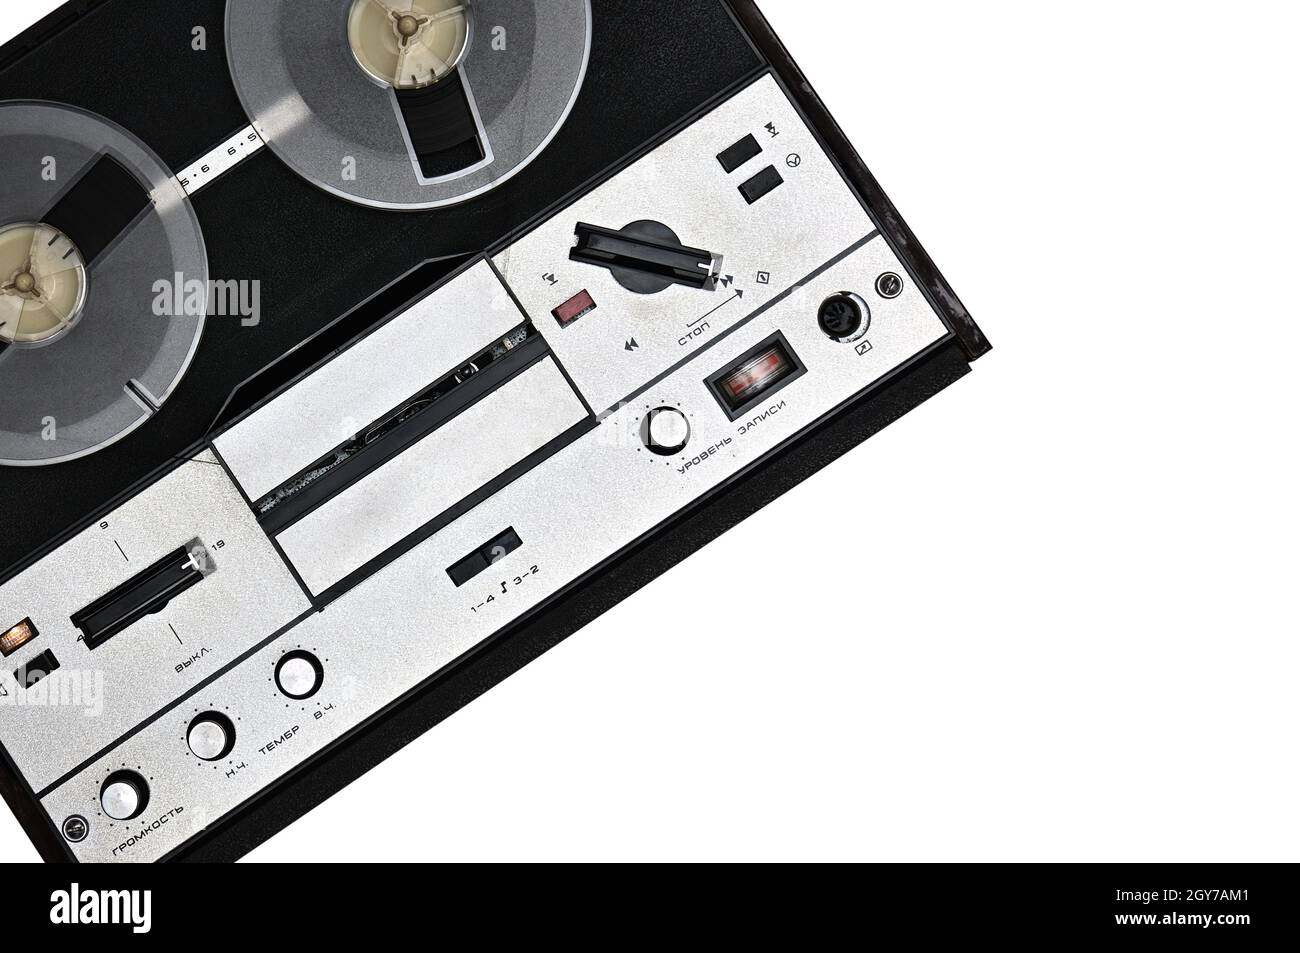 https://c8.alamy.com/comp/2GY7AM1/vintage-reel-to-reel-tape-recorder-on-isolated-white-background-retro-tape-recorder-from-the-soviet-union-2GY7AM1.jpg